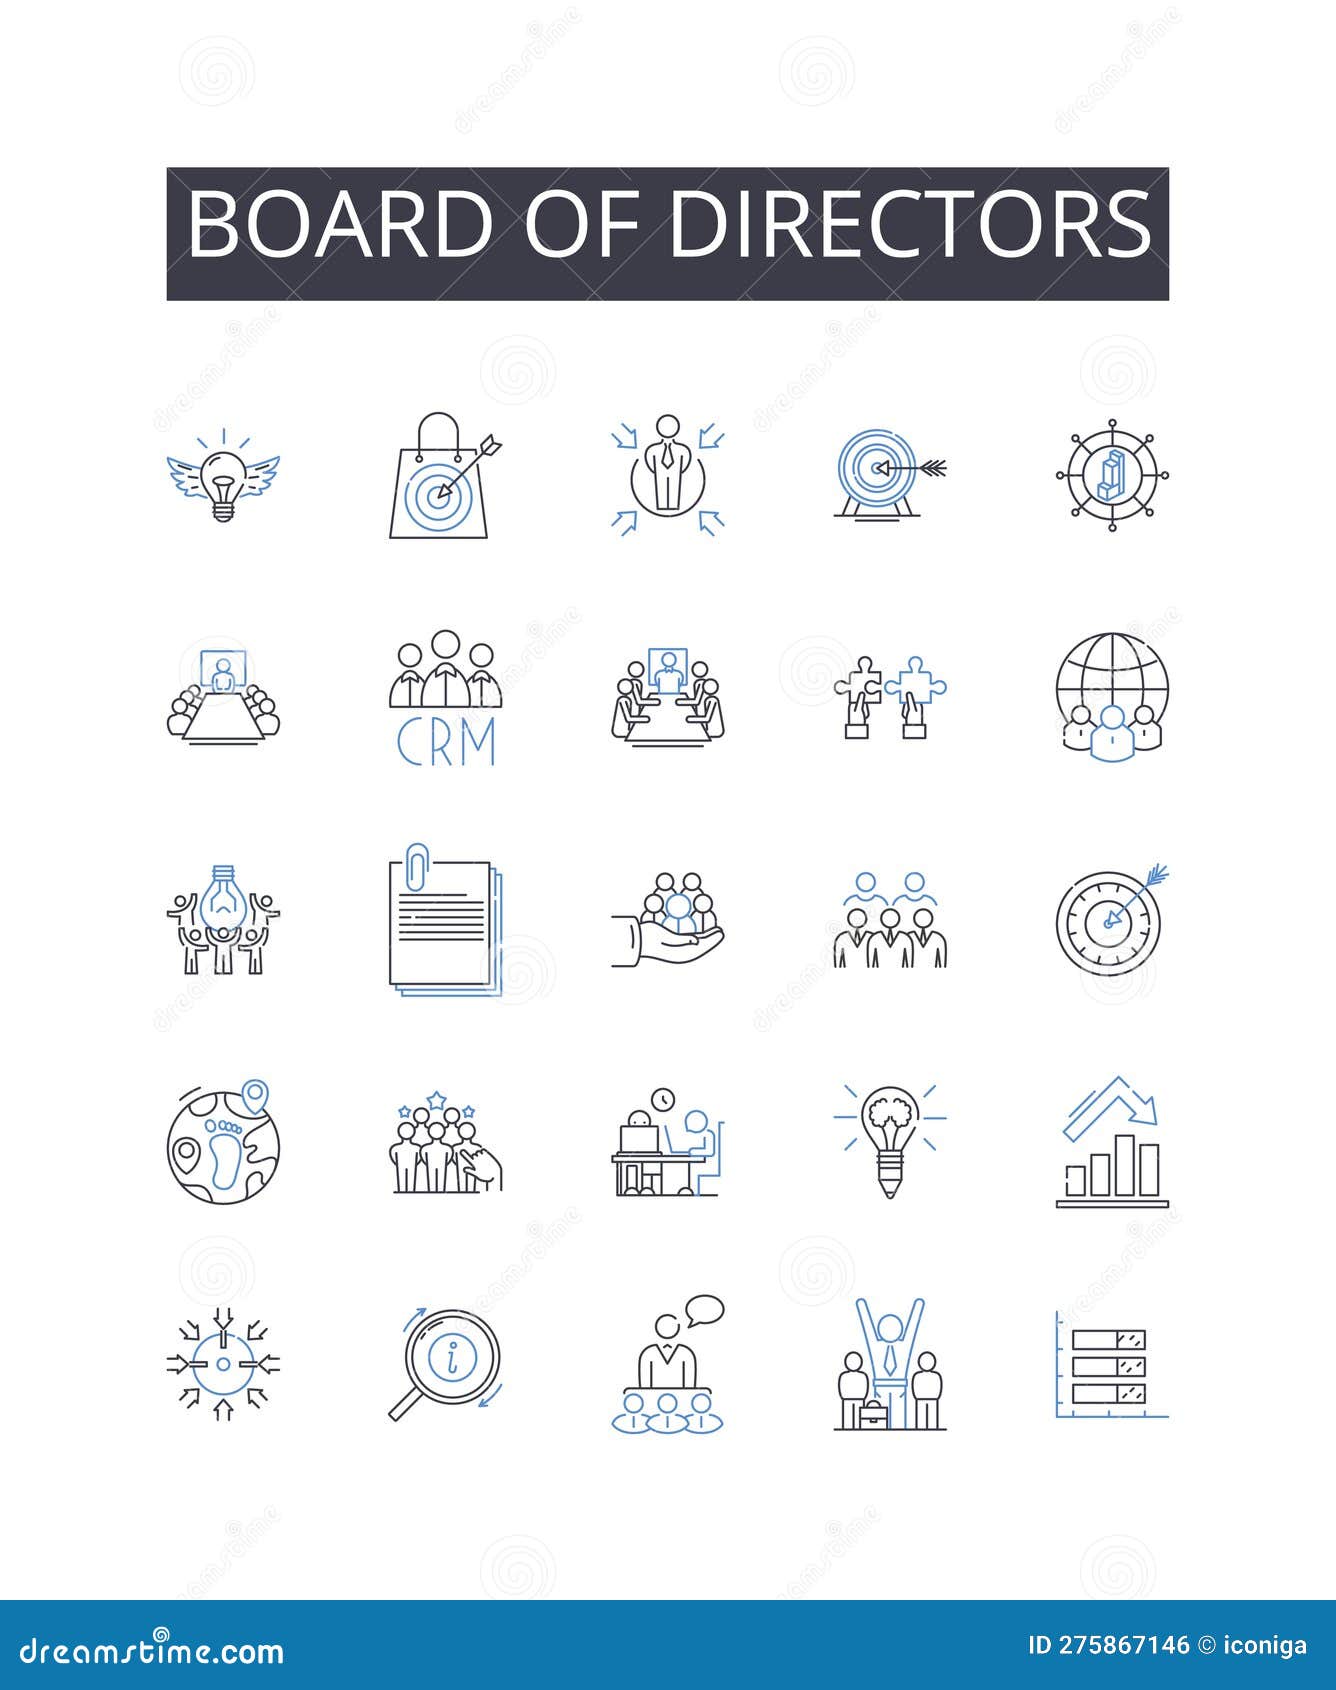 board of directors line icons collection. creativity, collaboration, structure, inspiration, expressiveness, emotion